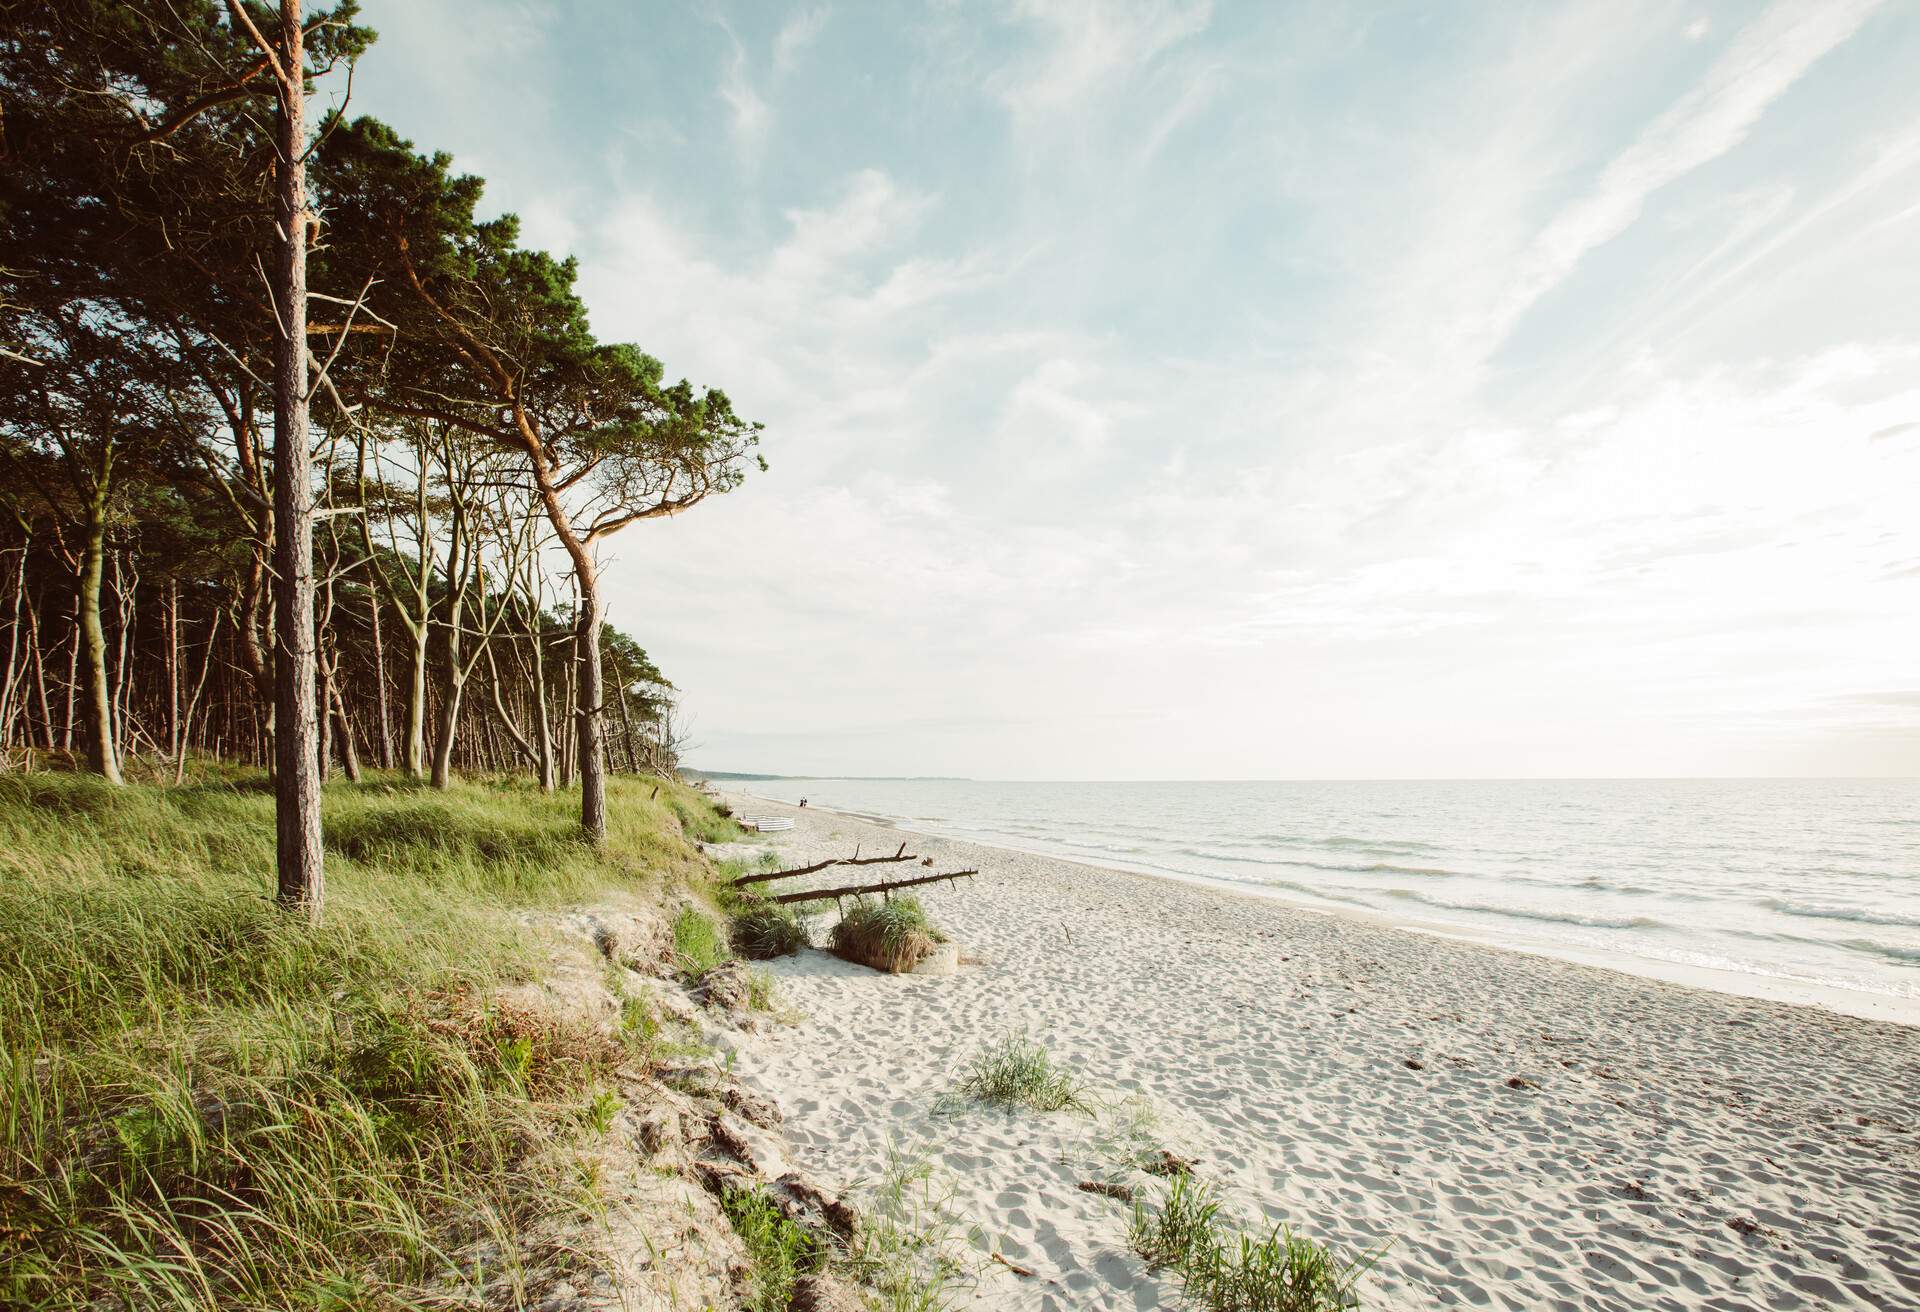 DEST_GERMANY_WESTSTRAND_THEME_BEACH_GettyImages-1085735450